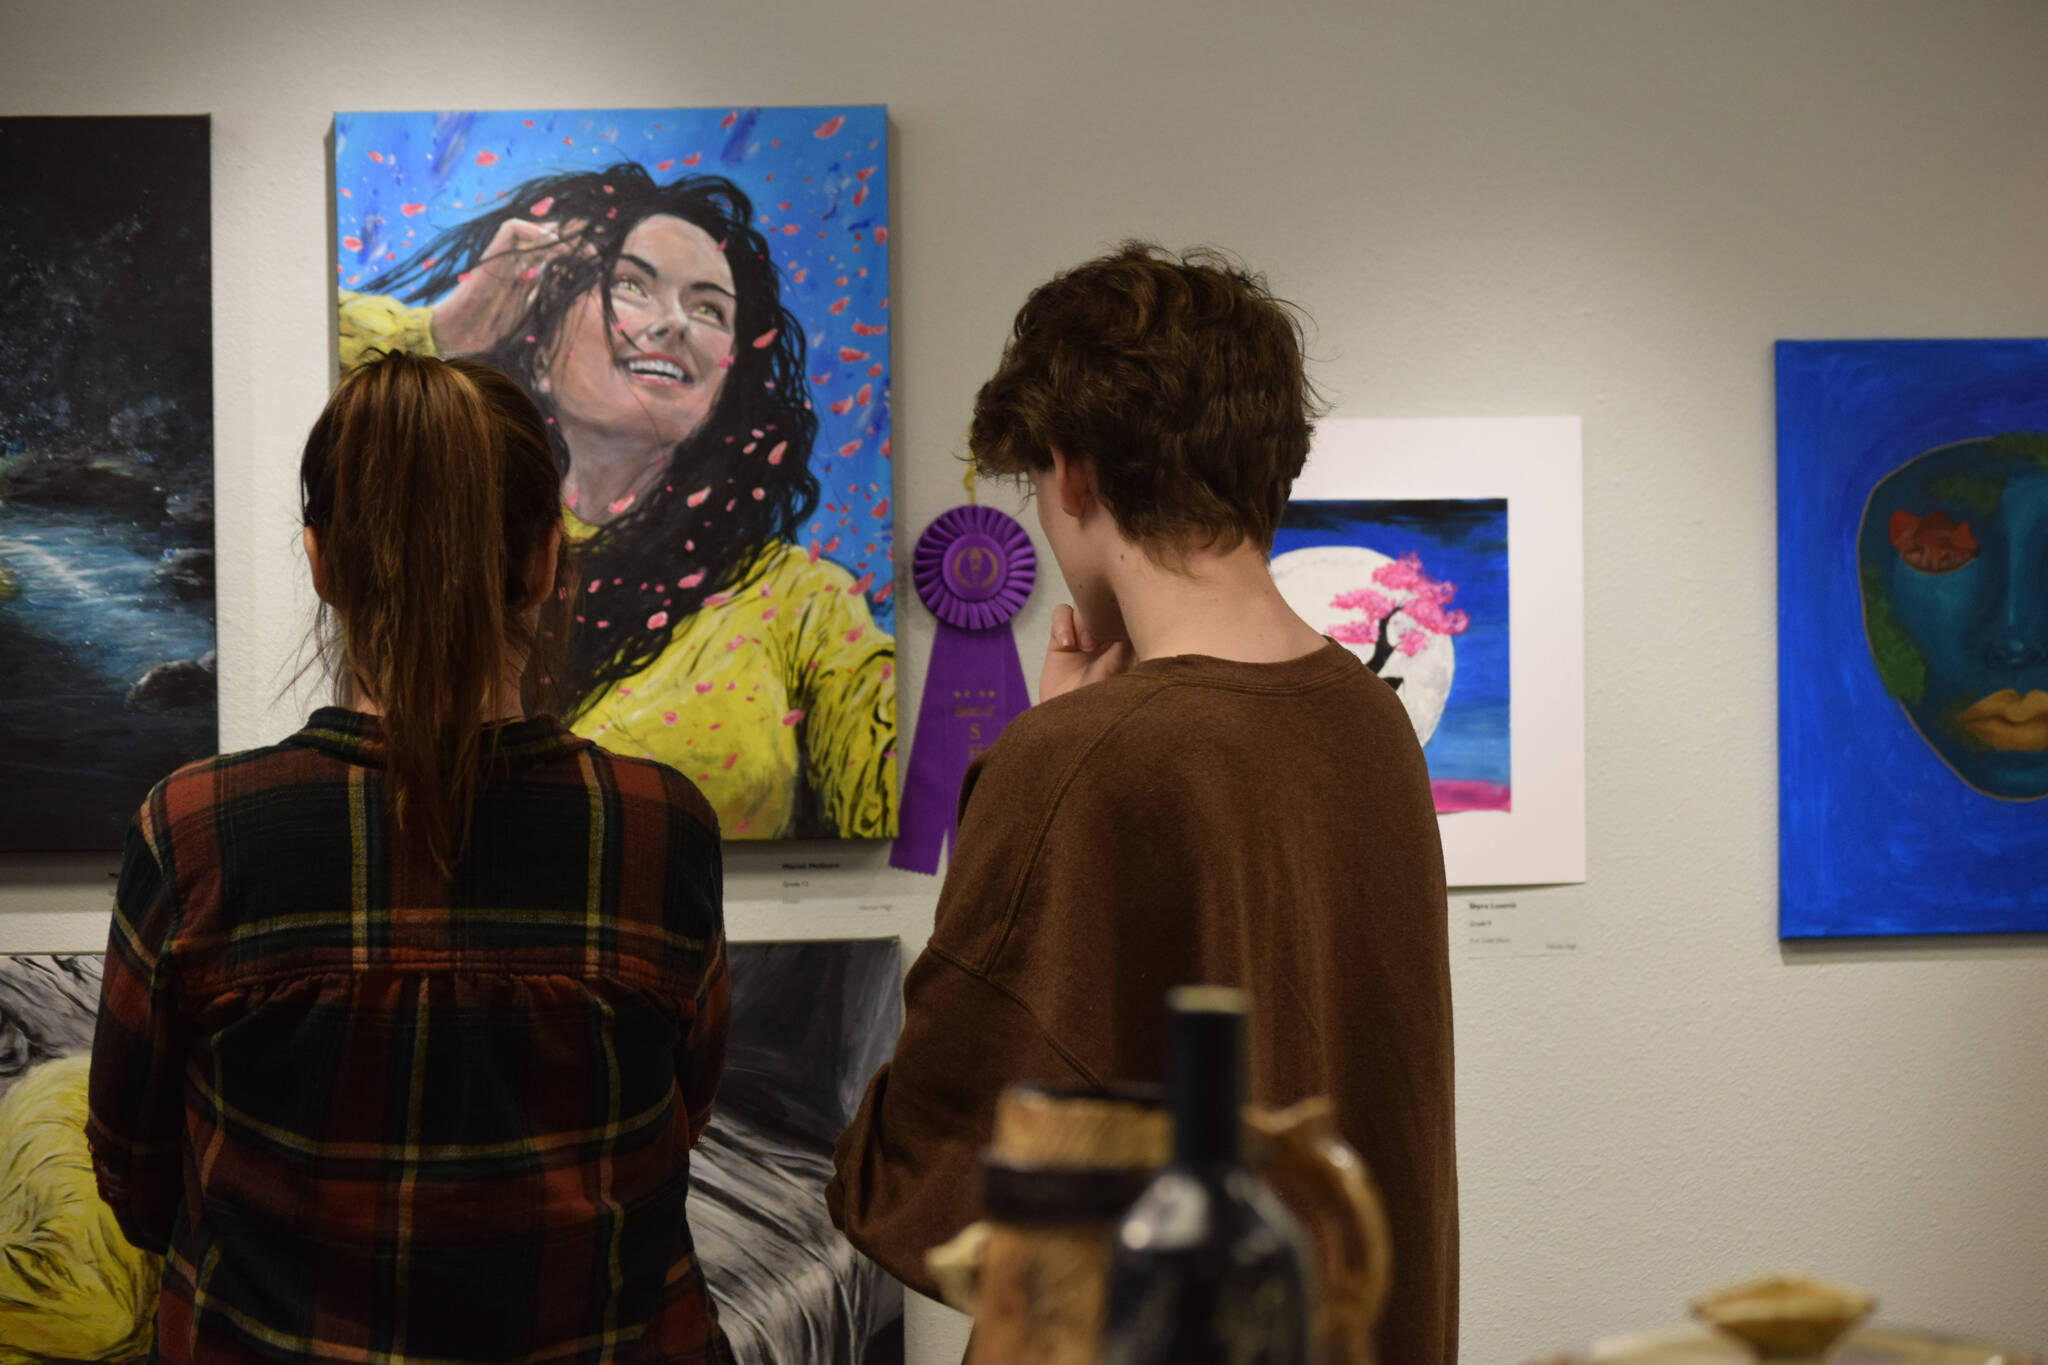 Community members look at artwork on display during the opening reception of the Kenai Art Center’s annual student show on Thursday, April 7, 2022. (Camille Botello/Peninsula Clarion)